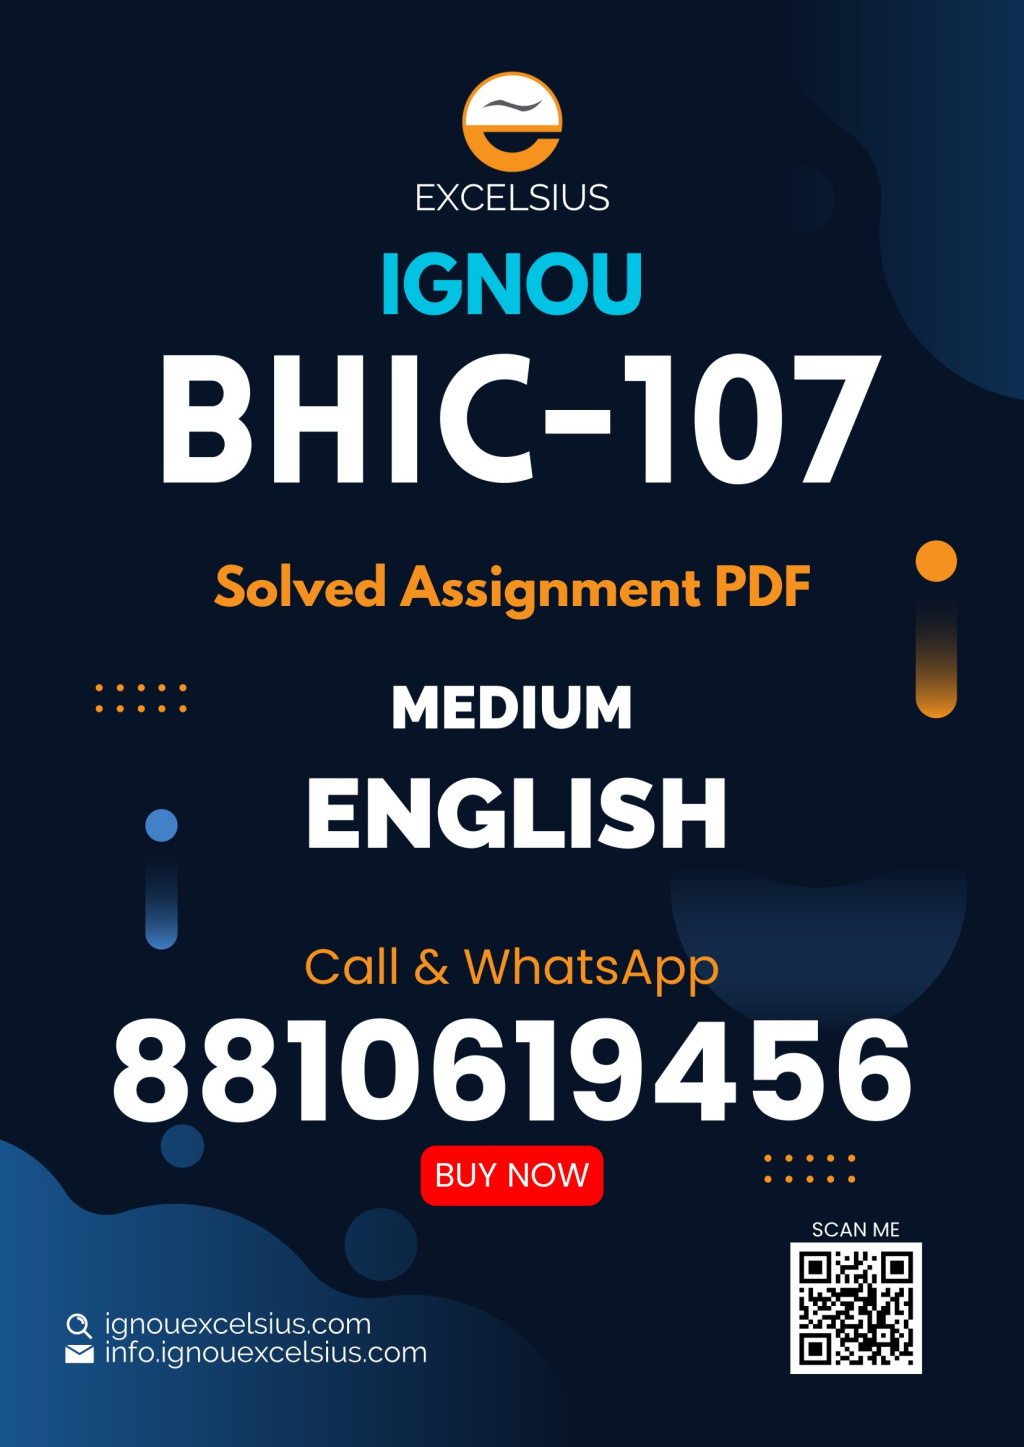 IGNOU BHIC-107 - History of India – IV (c. 1206 – 1550) Latest Solved Assignment-July 2022 – January 2023